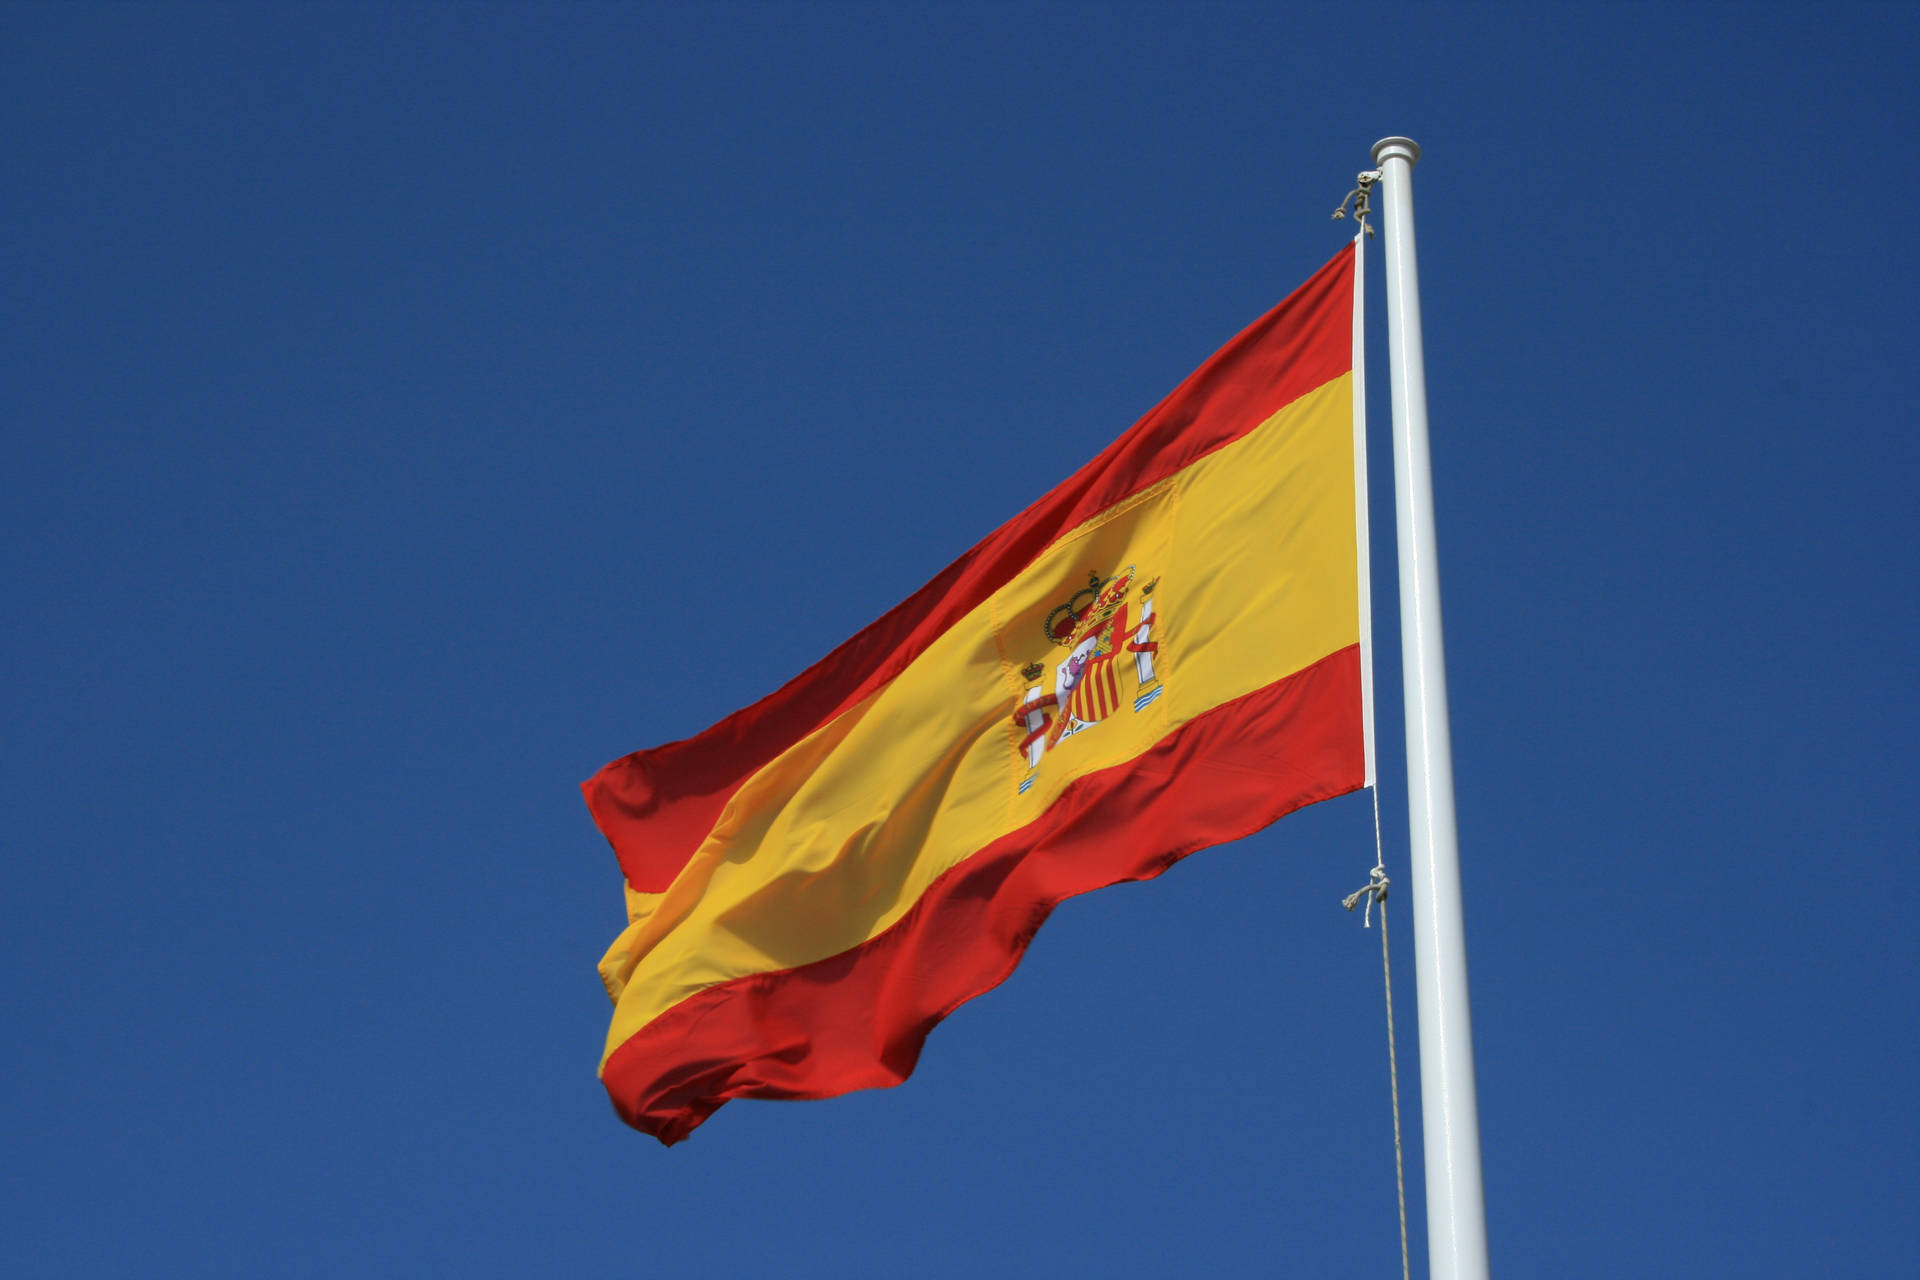 Spain's Pride - The Spanish Flag Majestically Flying Under Clear Blue Skies Background